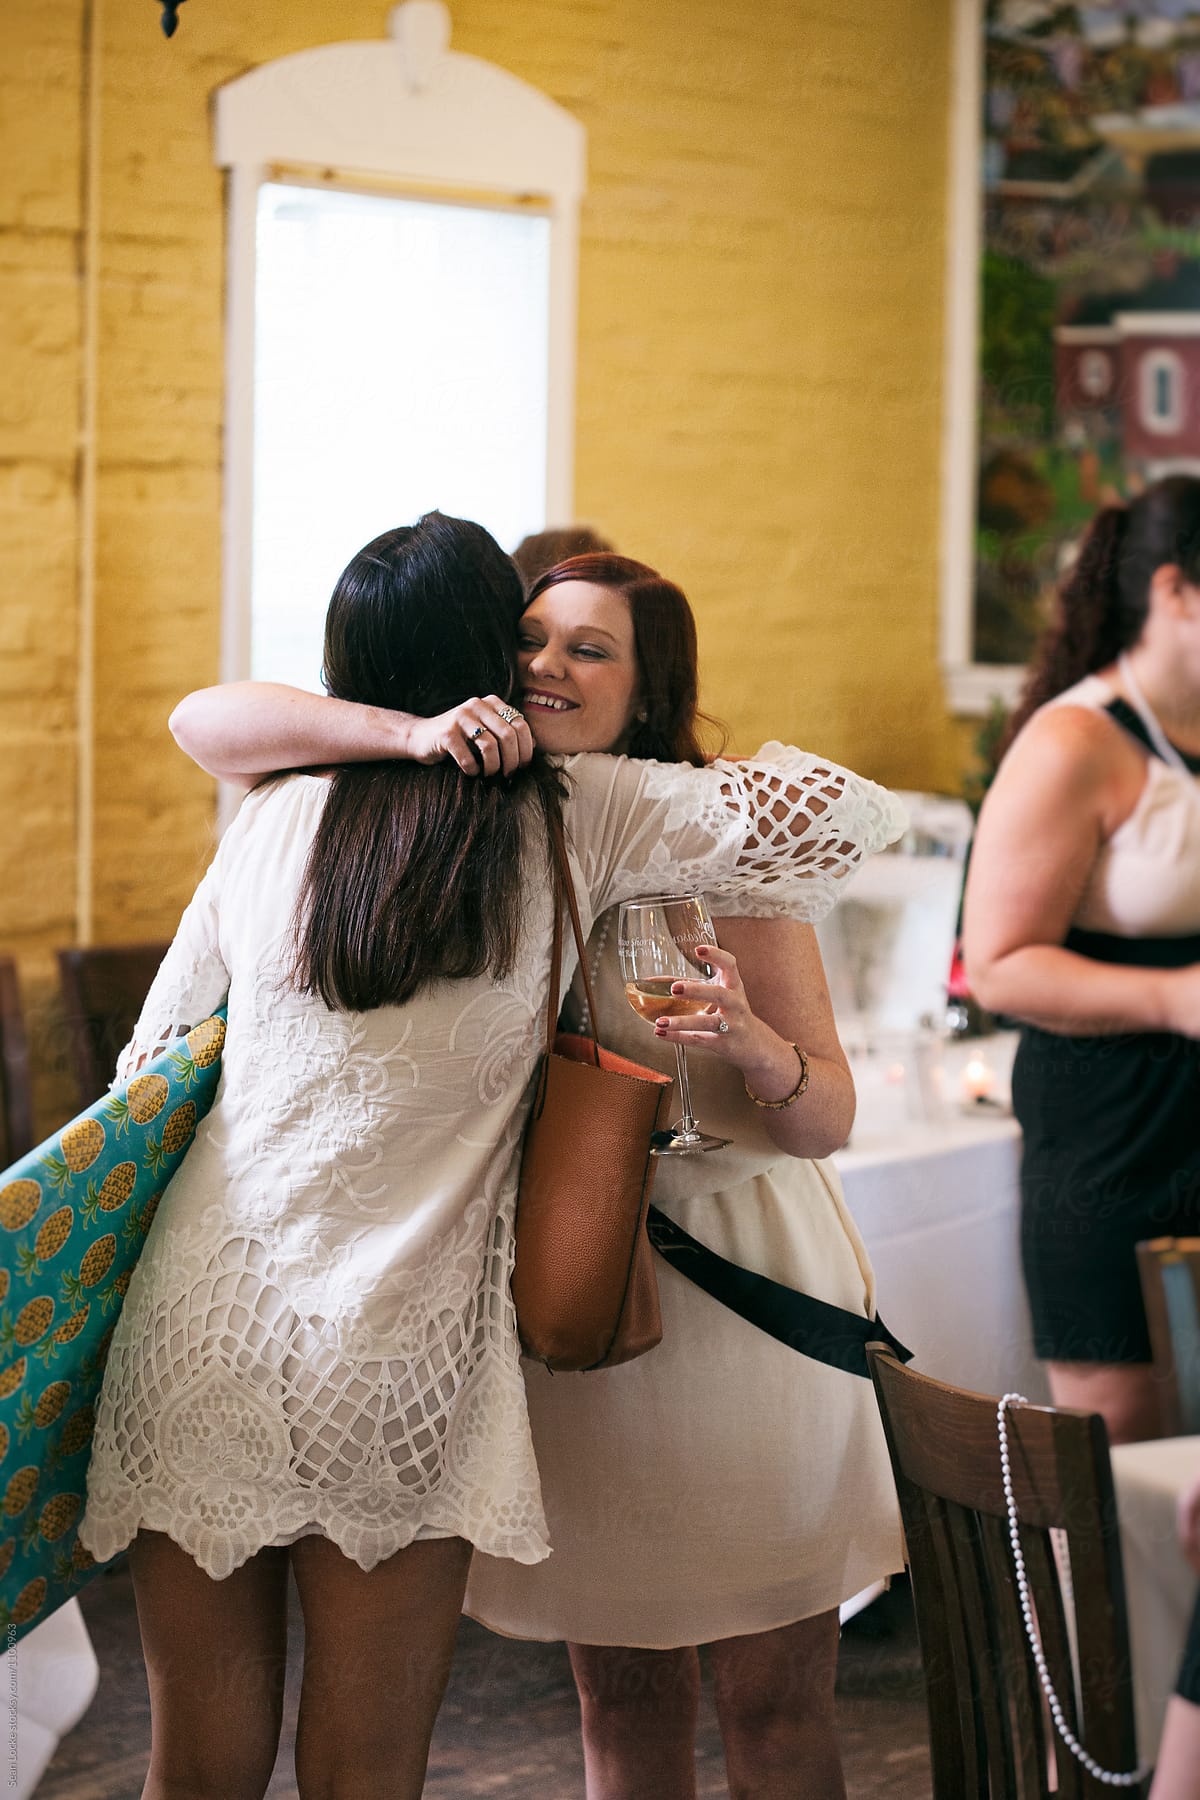 Shower Friends Embrace At Bridal Party By Sean Locke